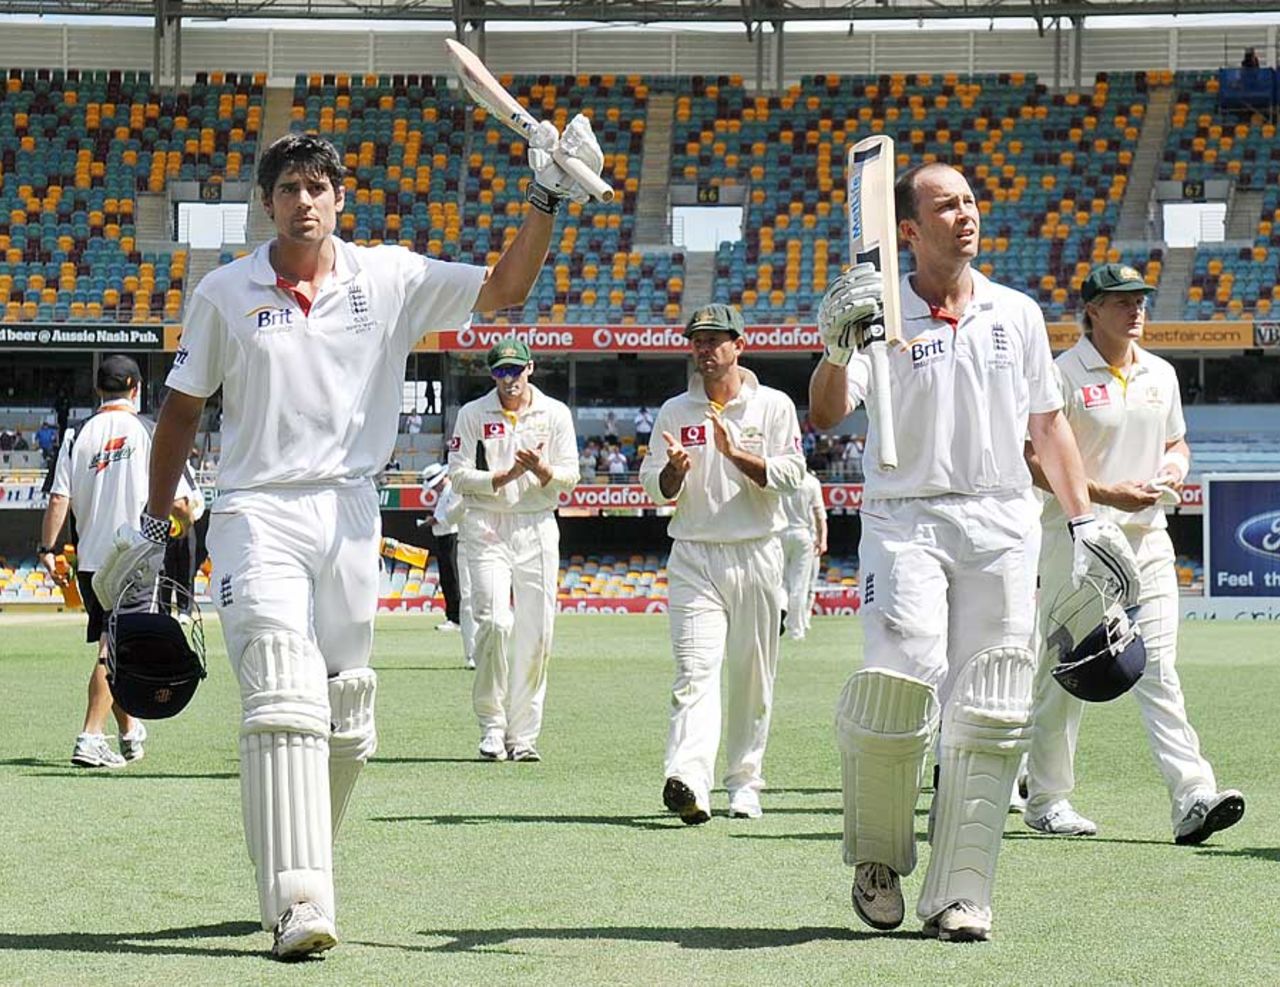 Alastair Cook and Jonathan Trott take the applause after their record stand, Australia v England, 1st Test, Brisbane, 5th day, November 29, 2010